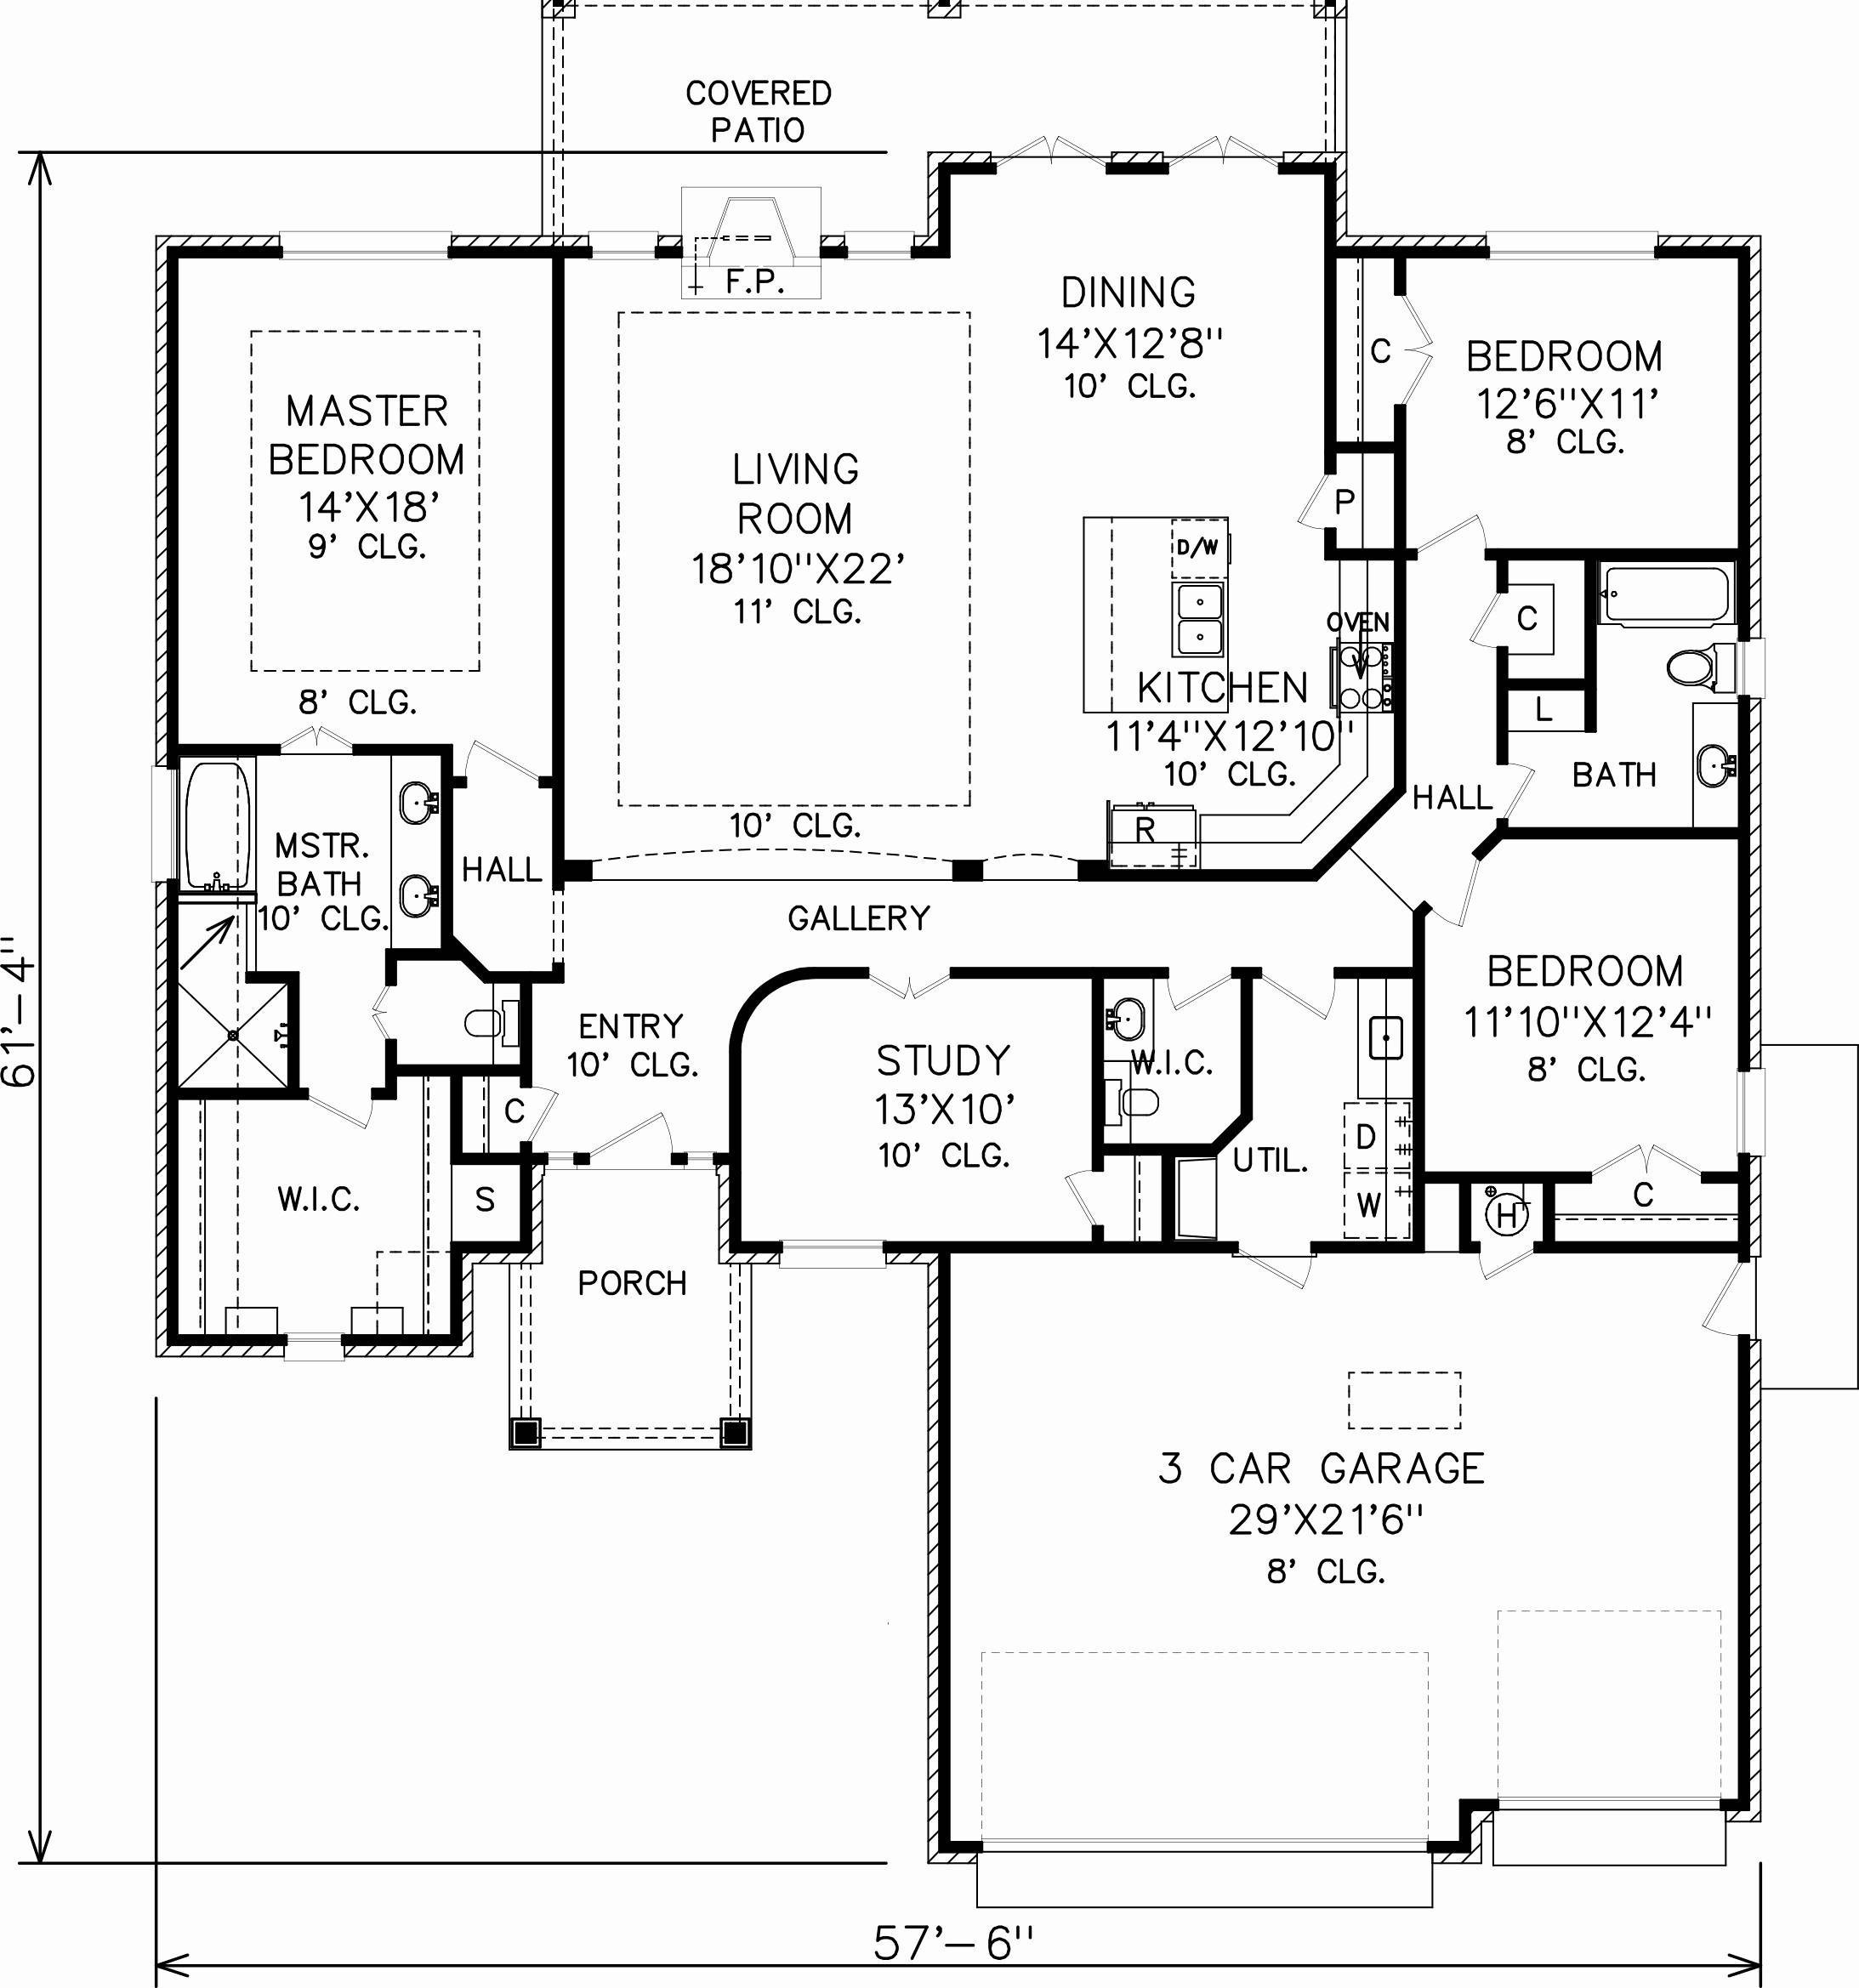 28 Famous Hardwood Floor solutions 2022 free download hardwood floor solutions of kitchen floor plan dimensions unique floor plan best long house with regard to floor plan best long house plans design plan 0d house and floor